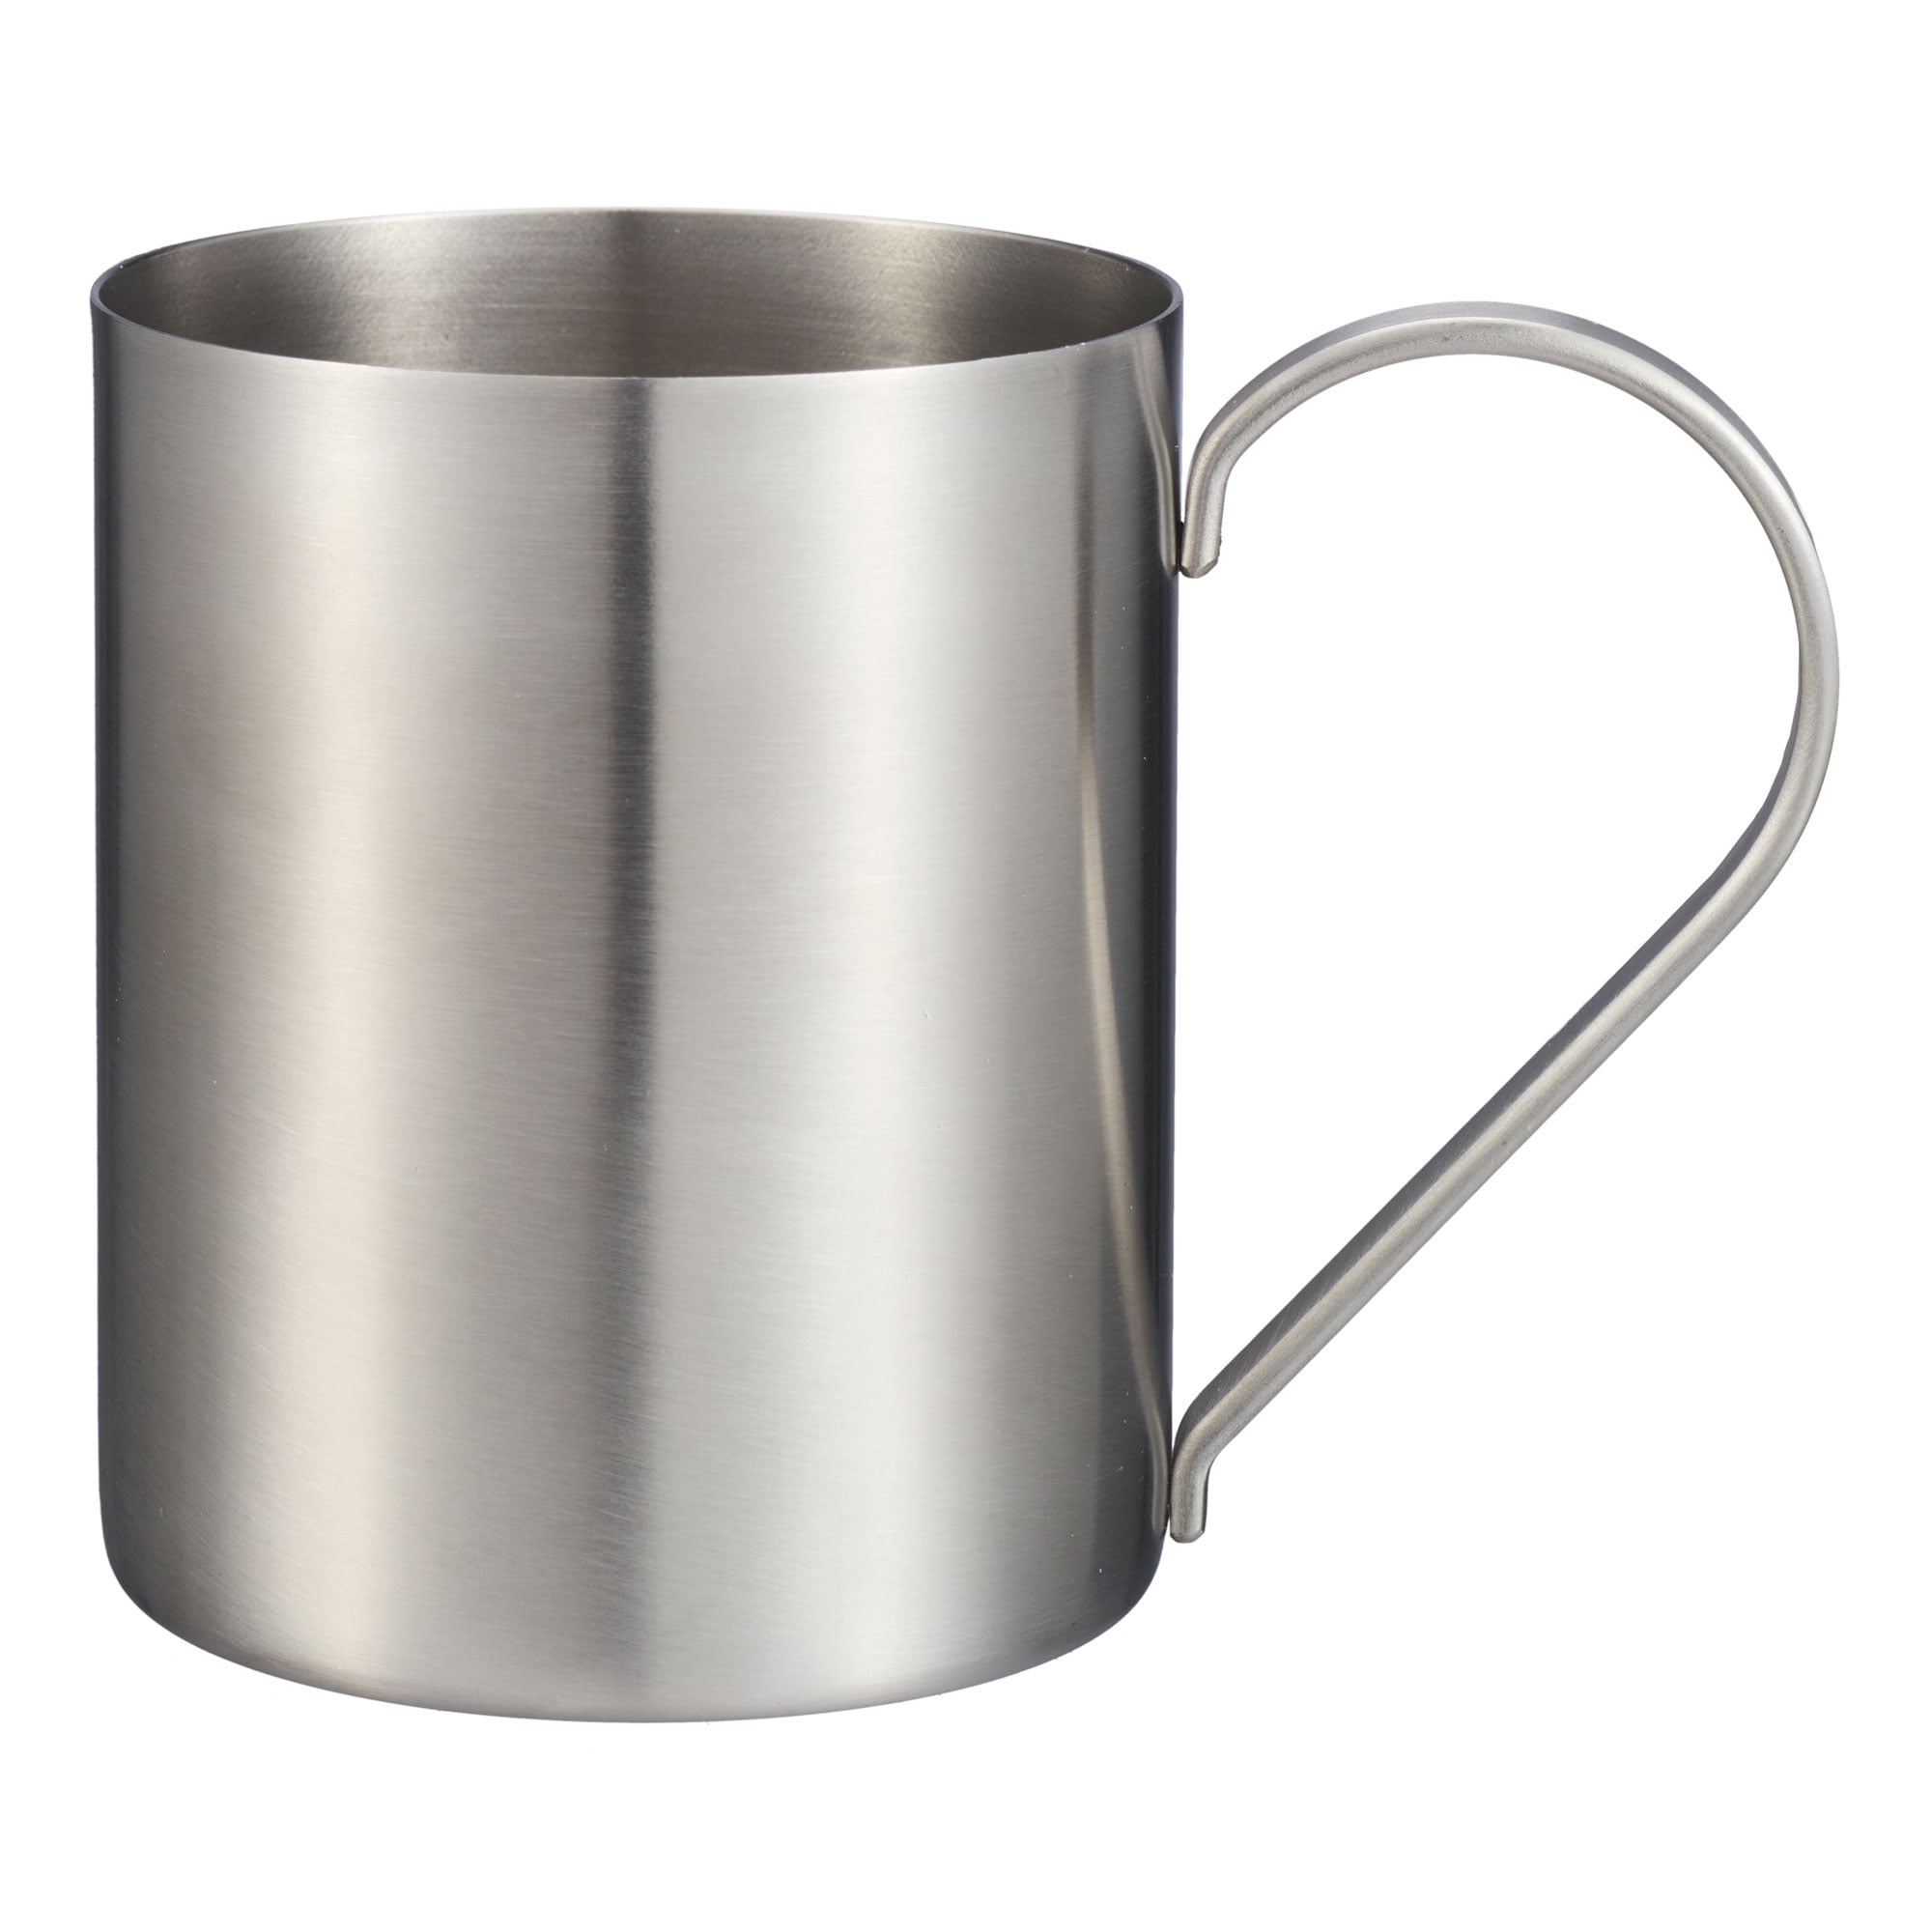 Better Homes & Gardens Stainless Steel Moscow Mule Mug, Stainless Steel